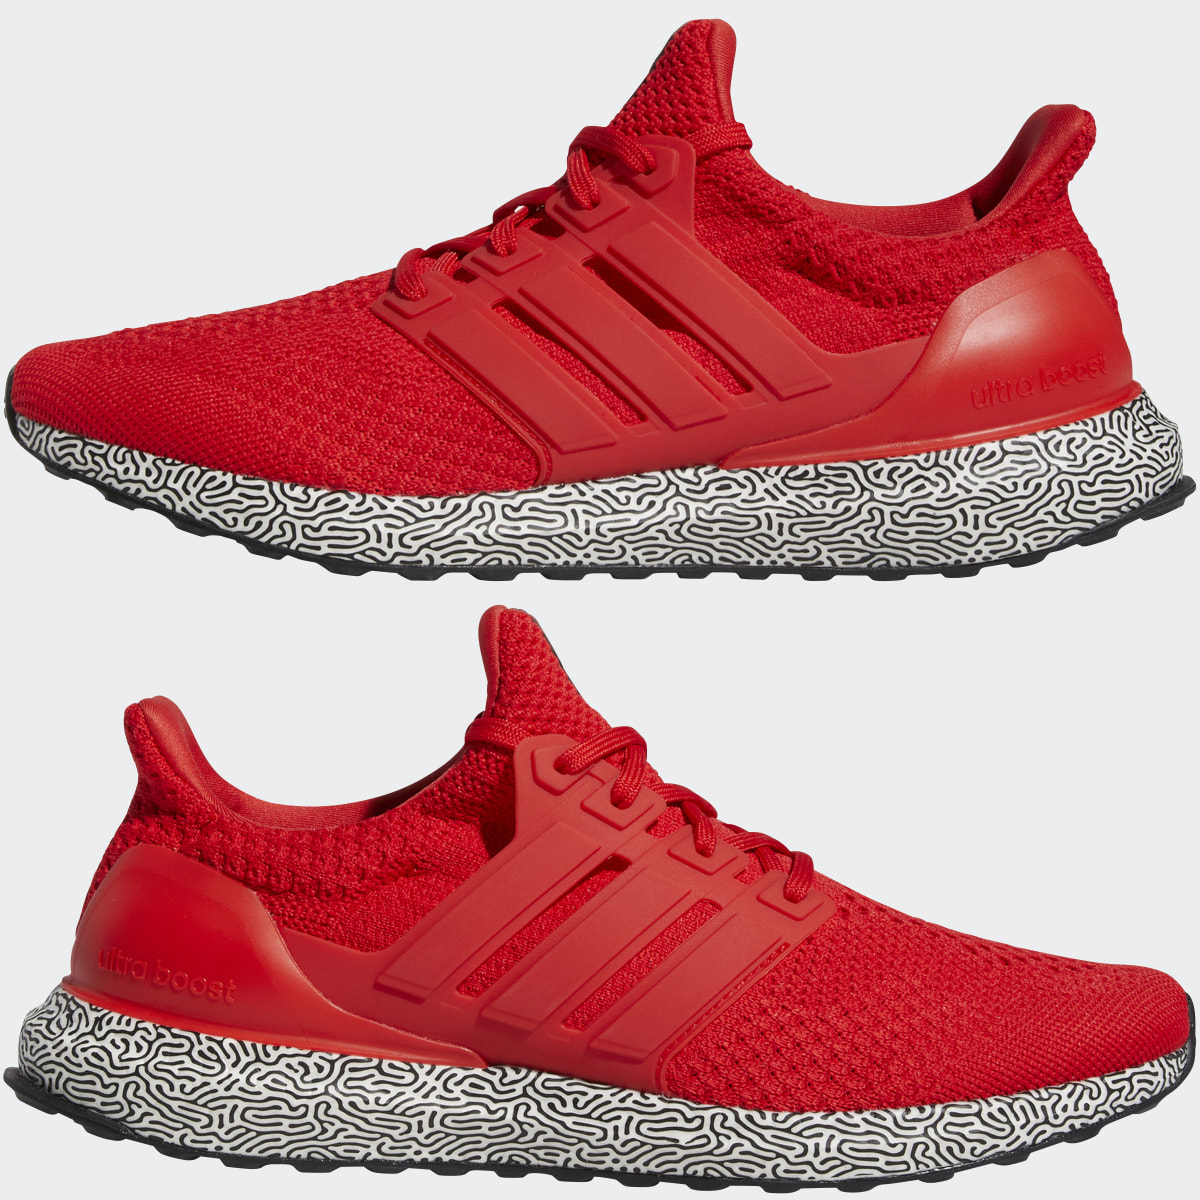 Adidas ULTRABOOST DNA SHOES. 8